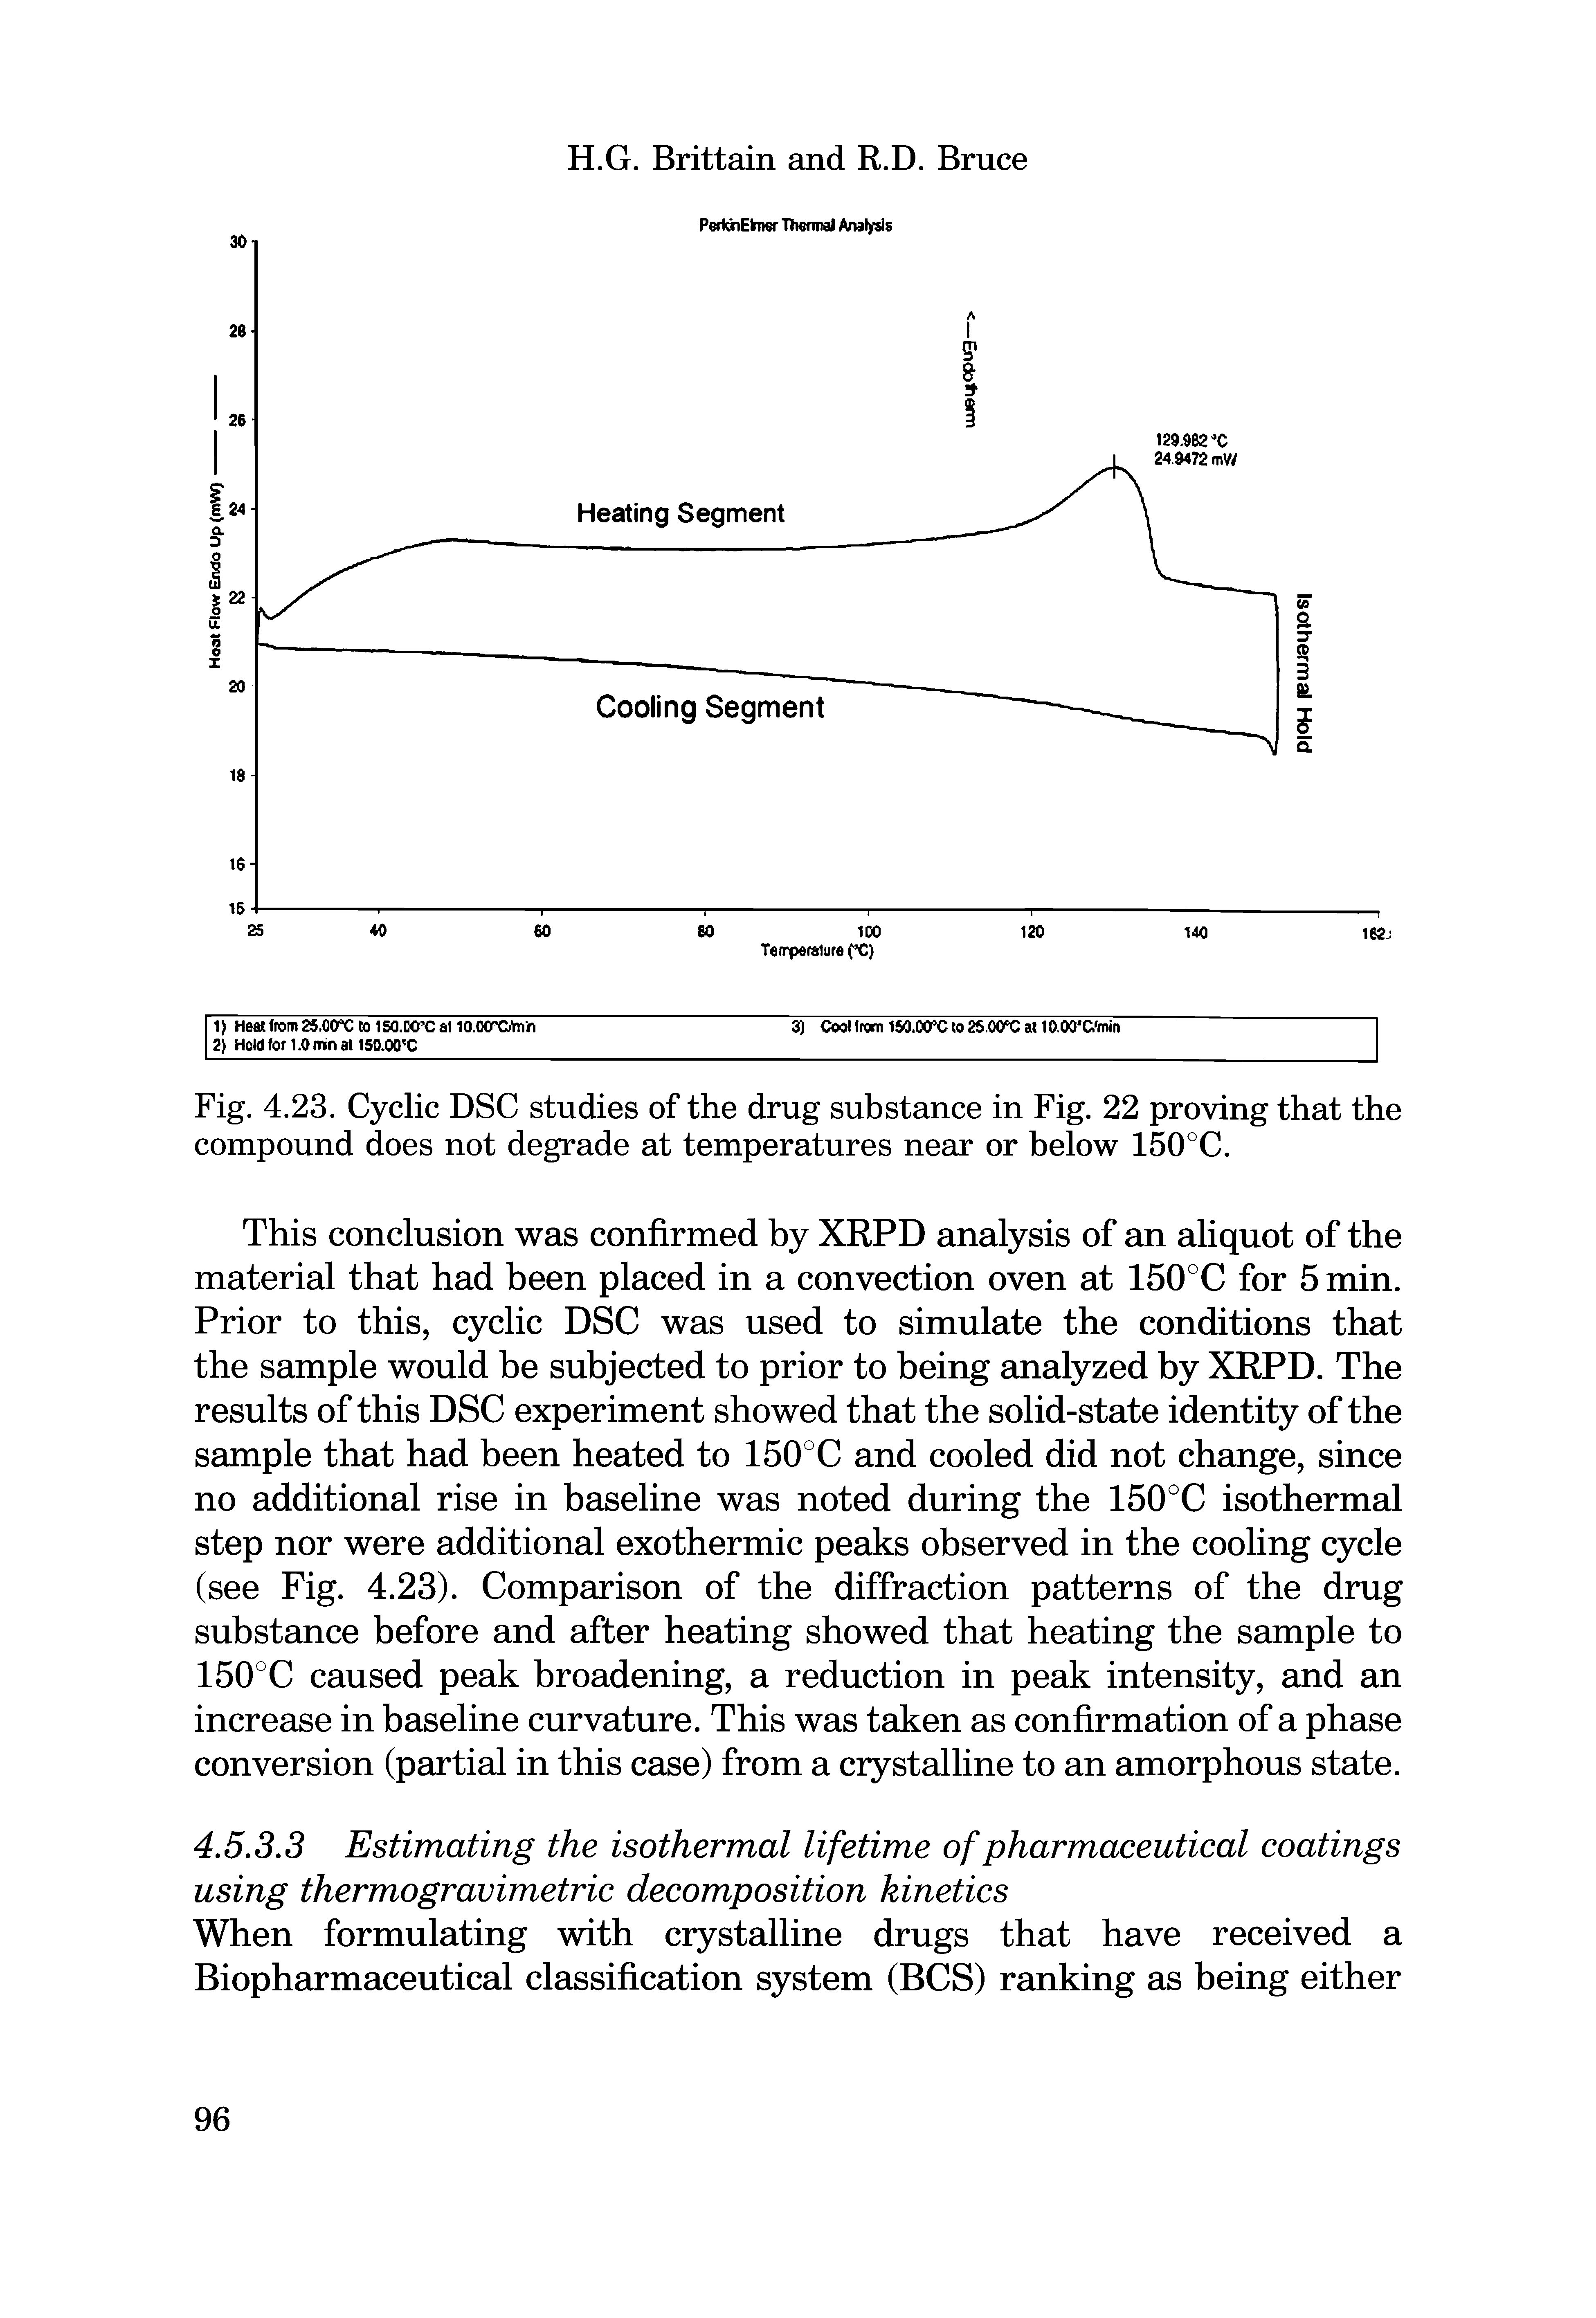 Fig. 4.23. Cyclic DSC studies of the drug substance in Fig. 22 proving that the compound does not degrade at temperatures near or below 150°C.